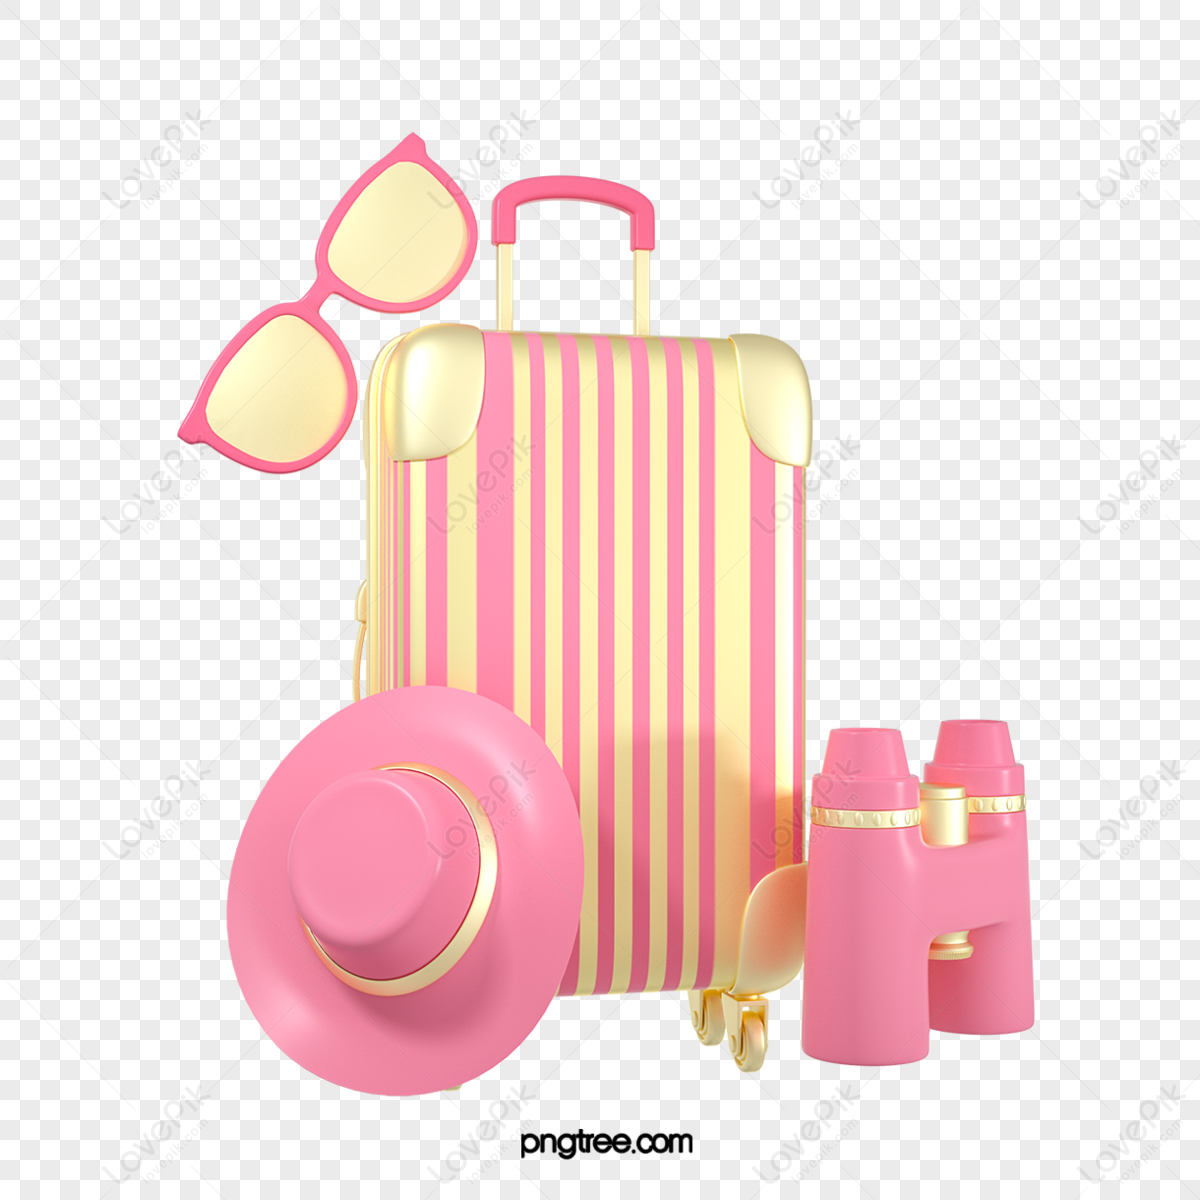 3d pink cartoon out travel suitcase,surfing,pink tender png transparent image